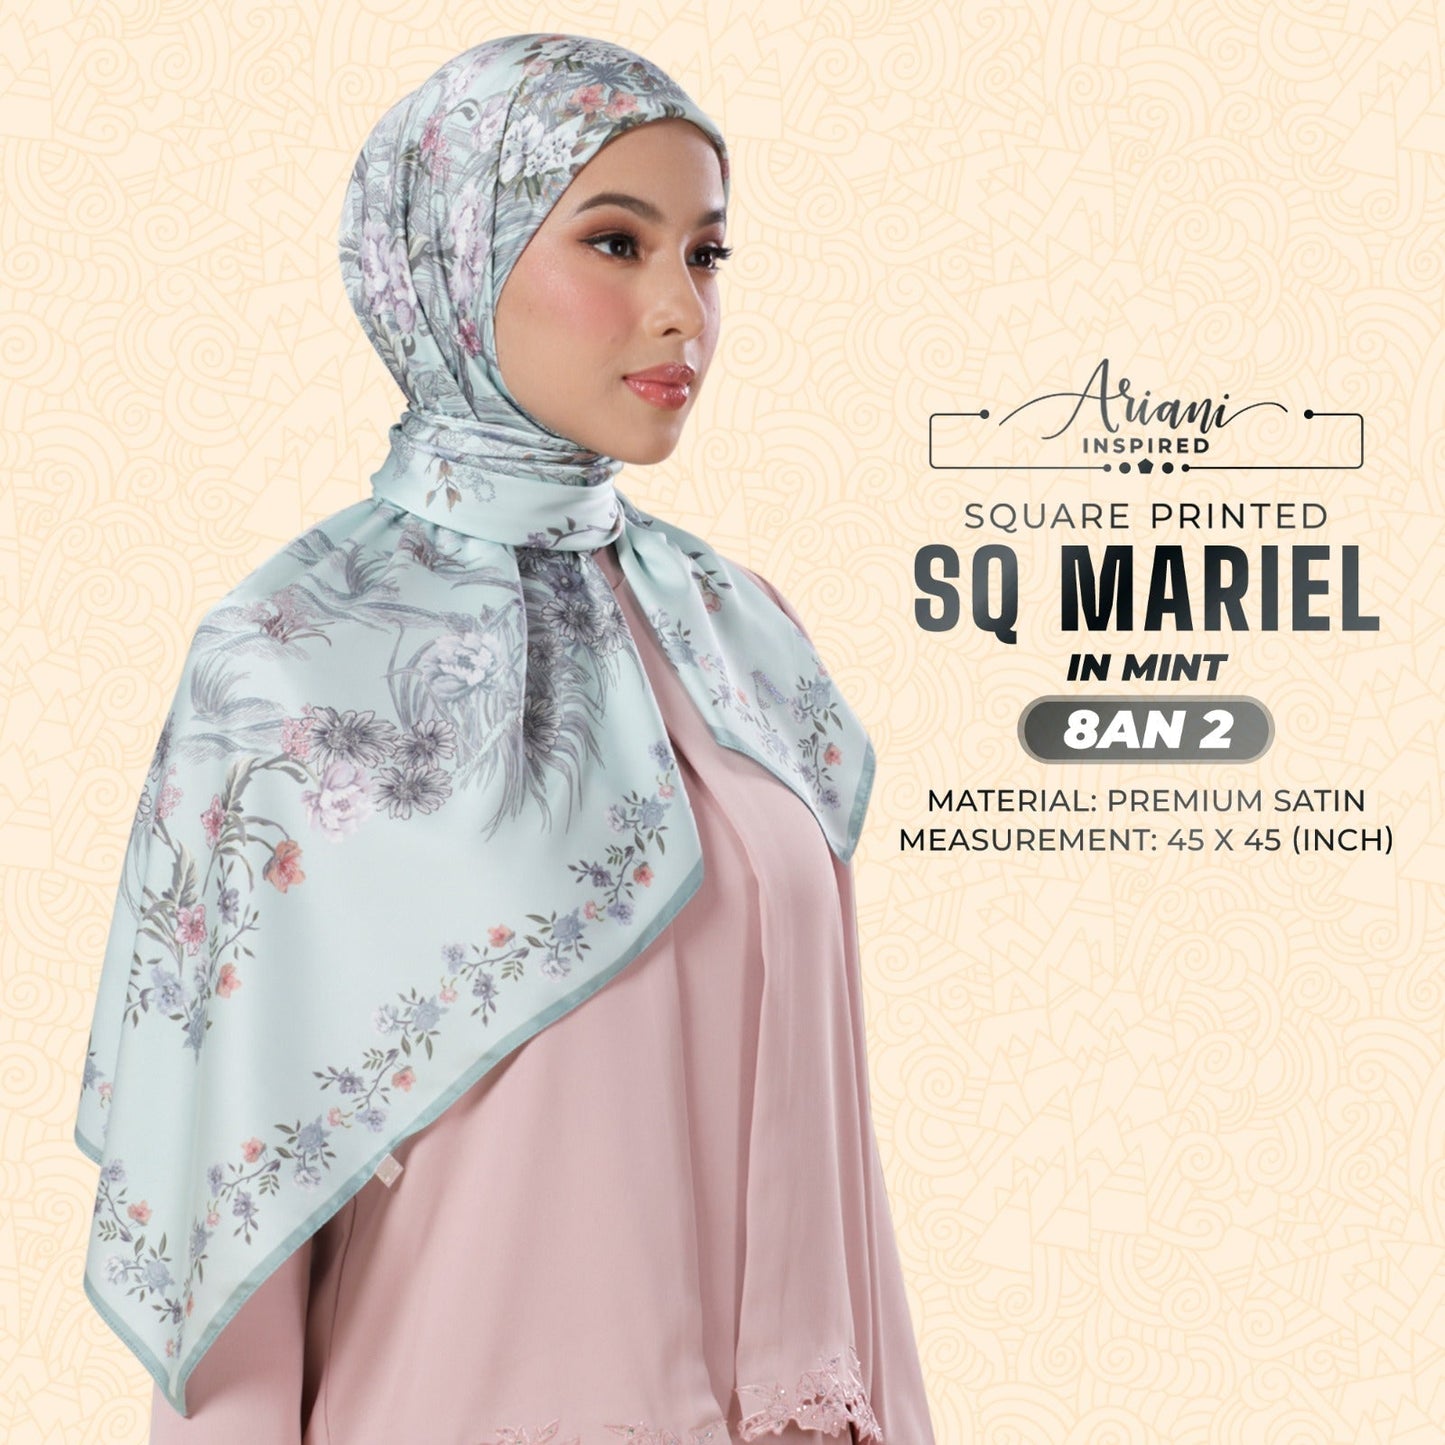 Ariani Inspired Printed Mariel SQ Collection